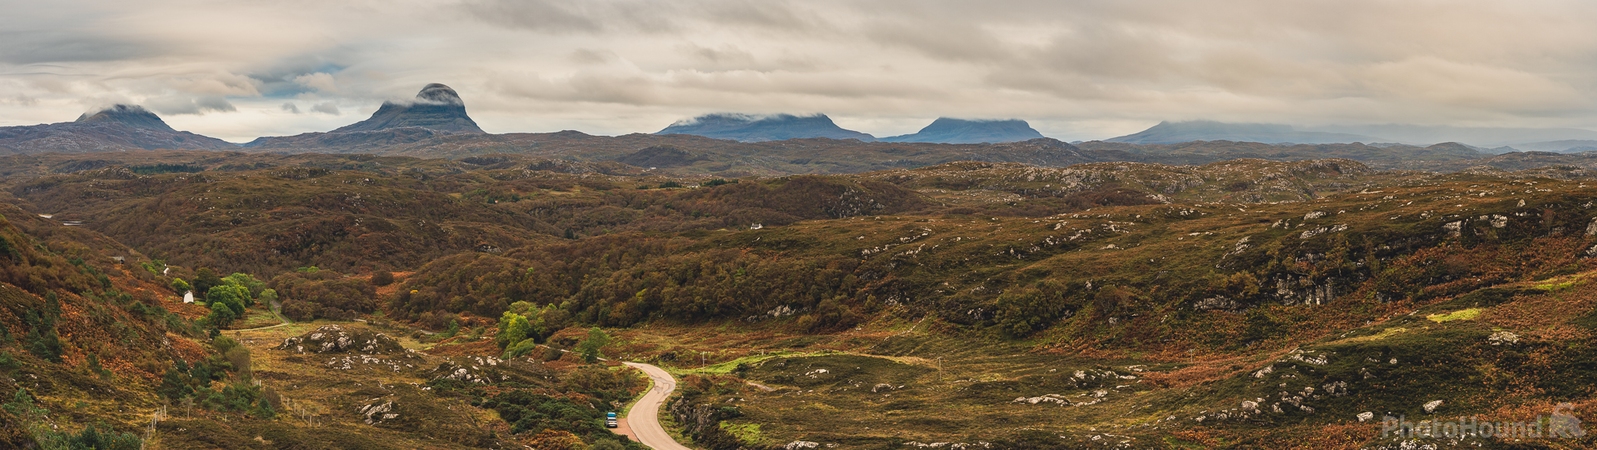 Image of Assynt Viewpoint by James Billings.